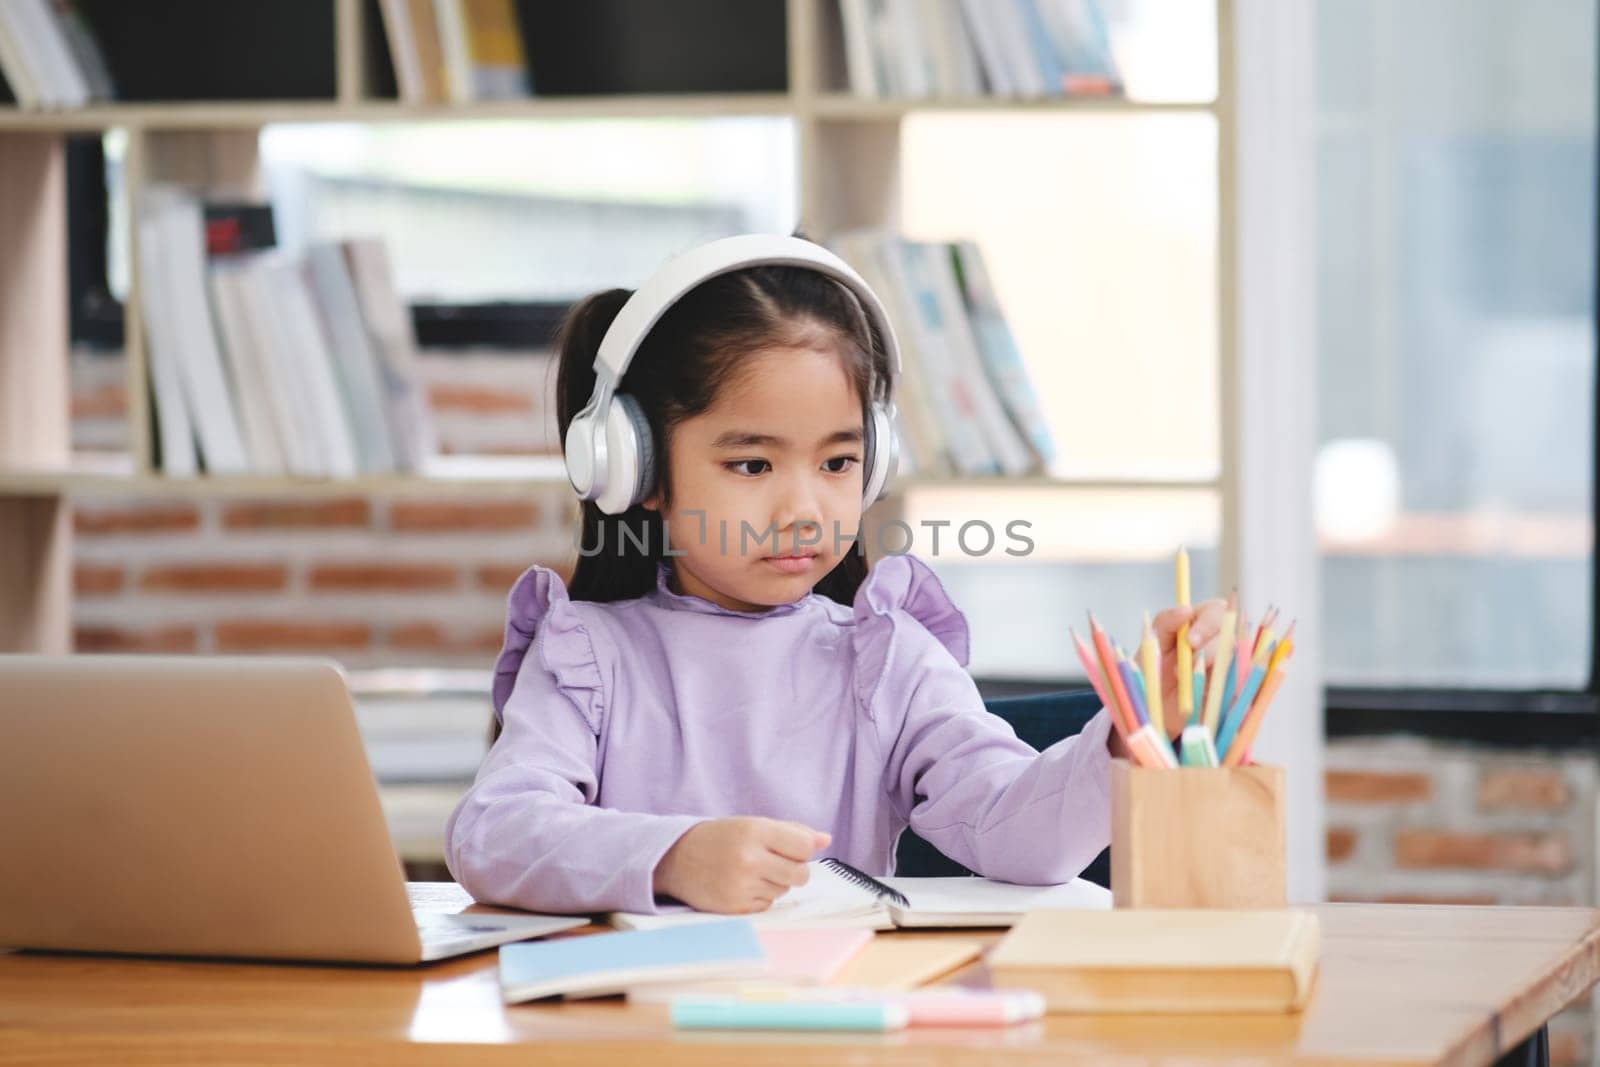 A young girl wearing headphones is sitting at a desk with a laptop by ijeab